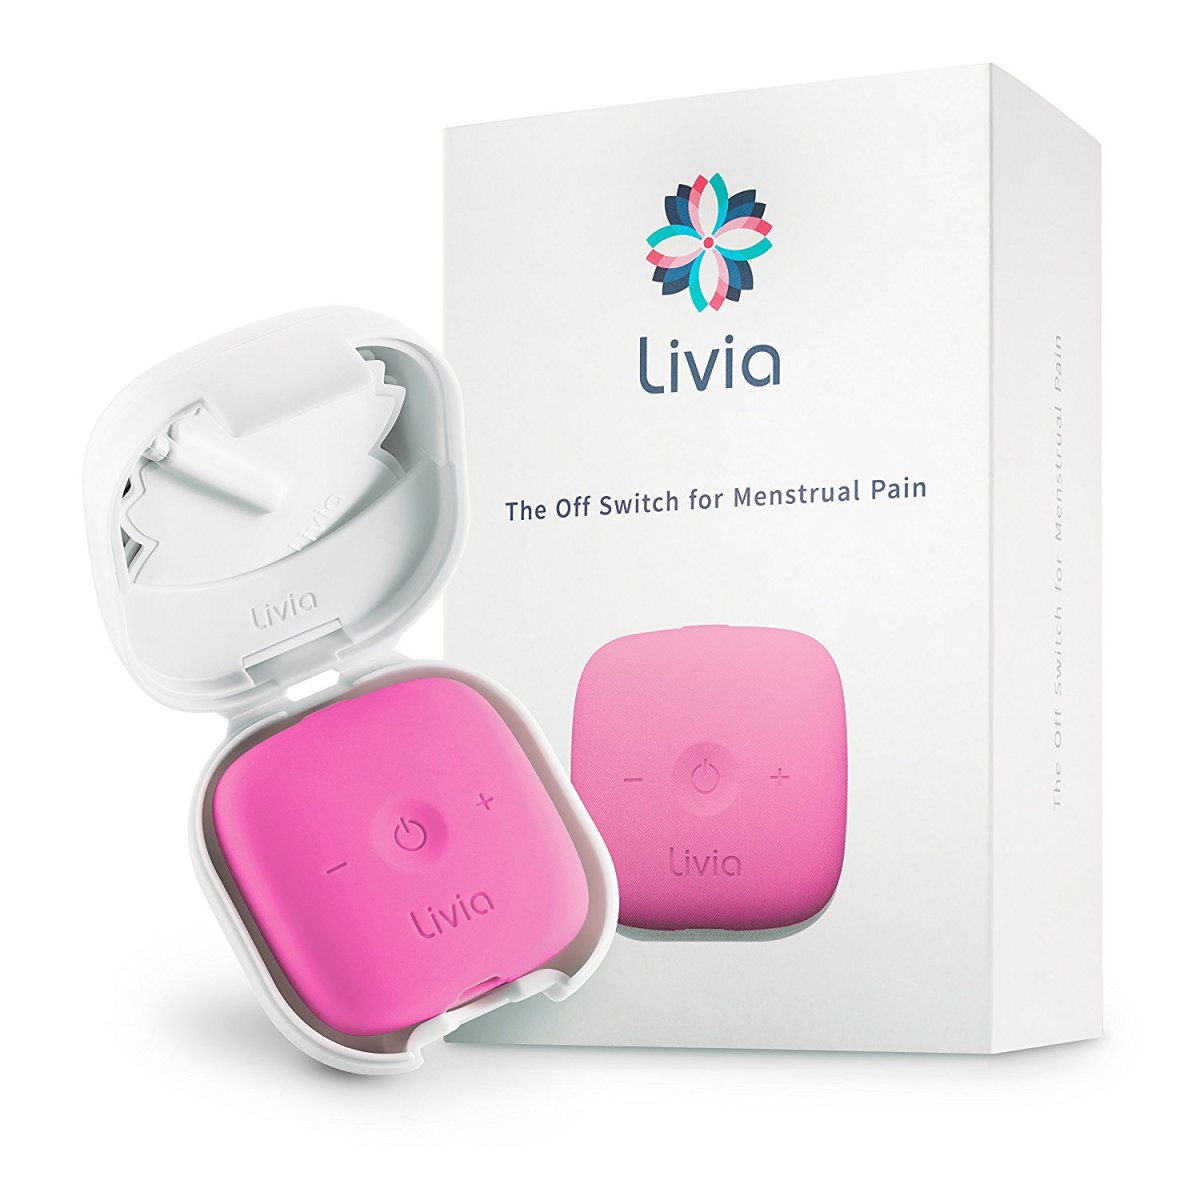 TENS units, such as Livia, instantly eliminate period pain.